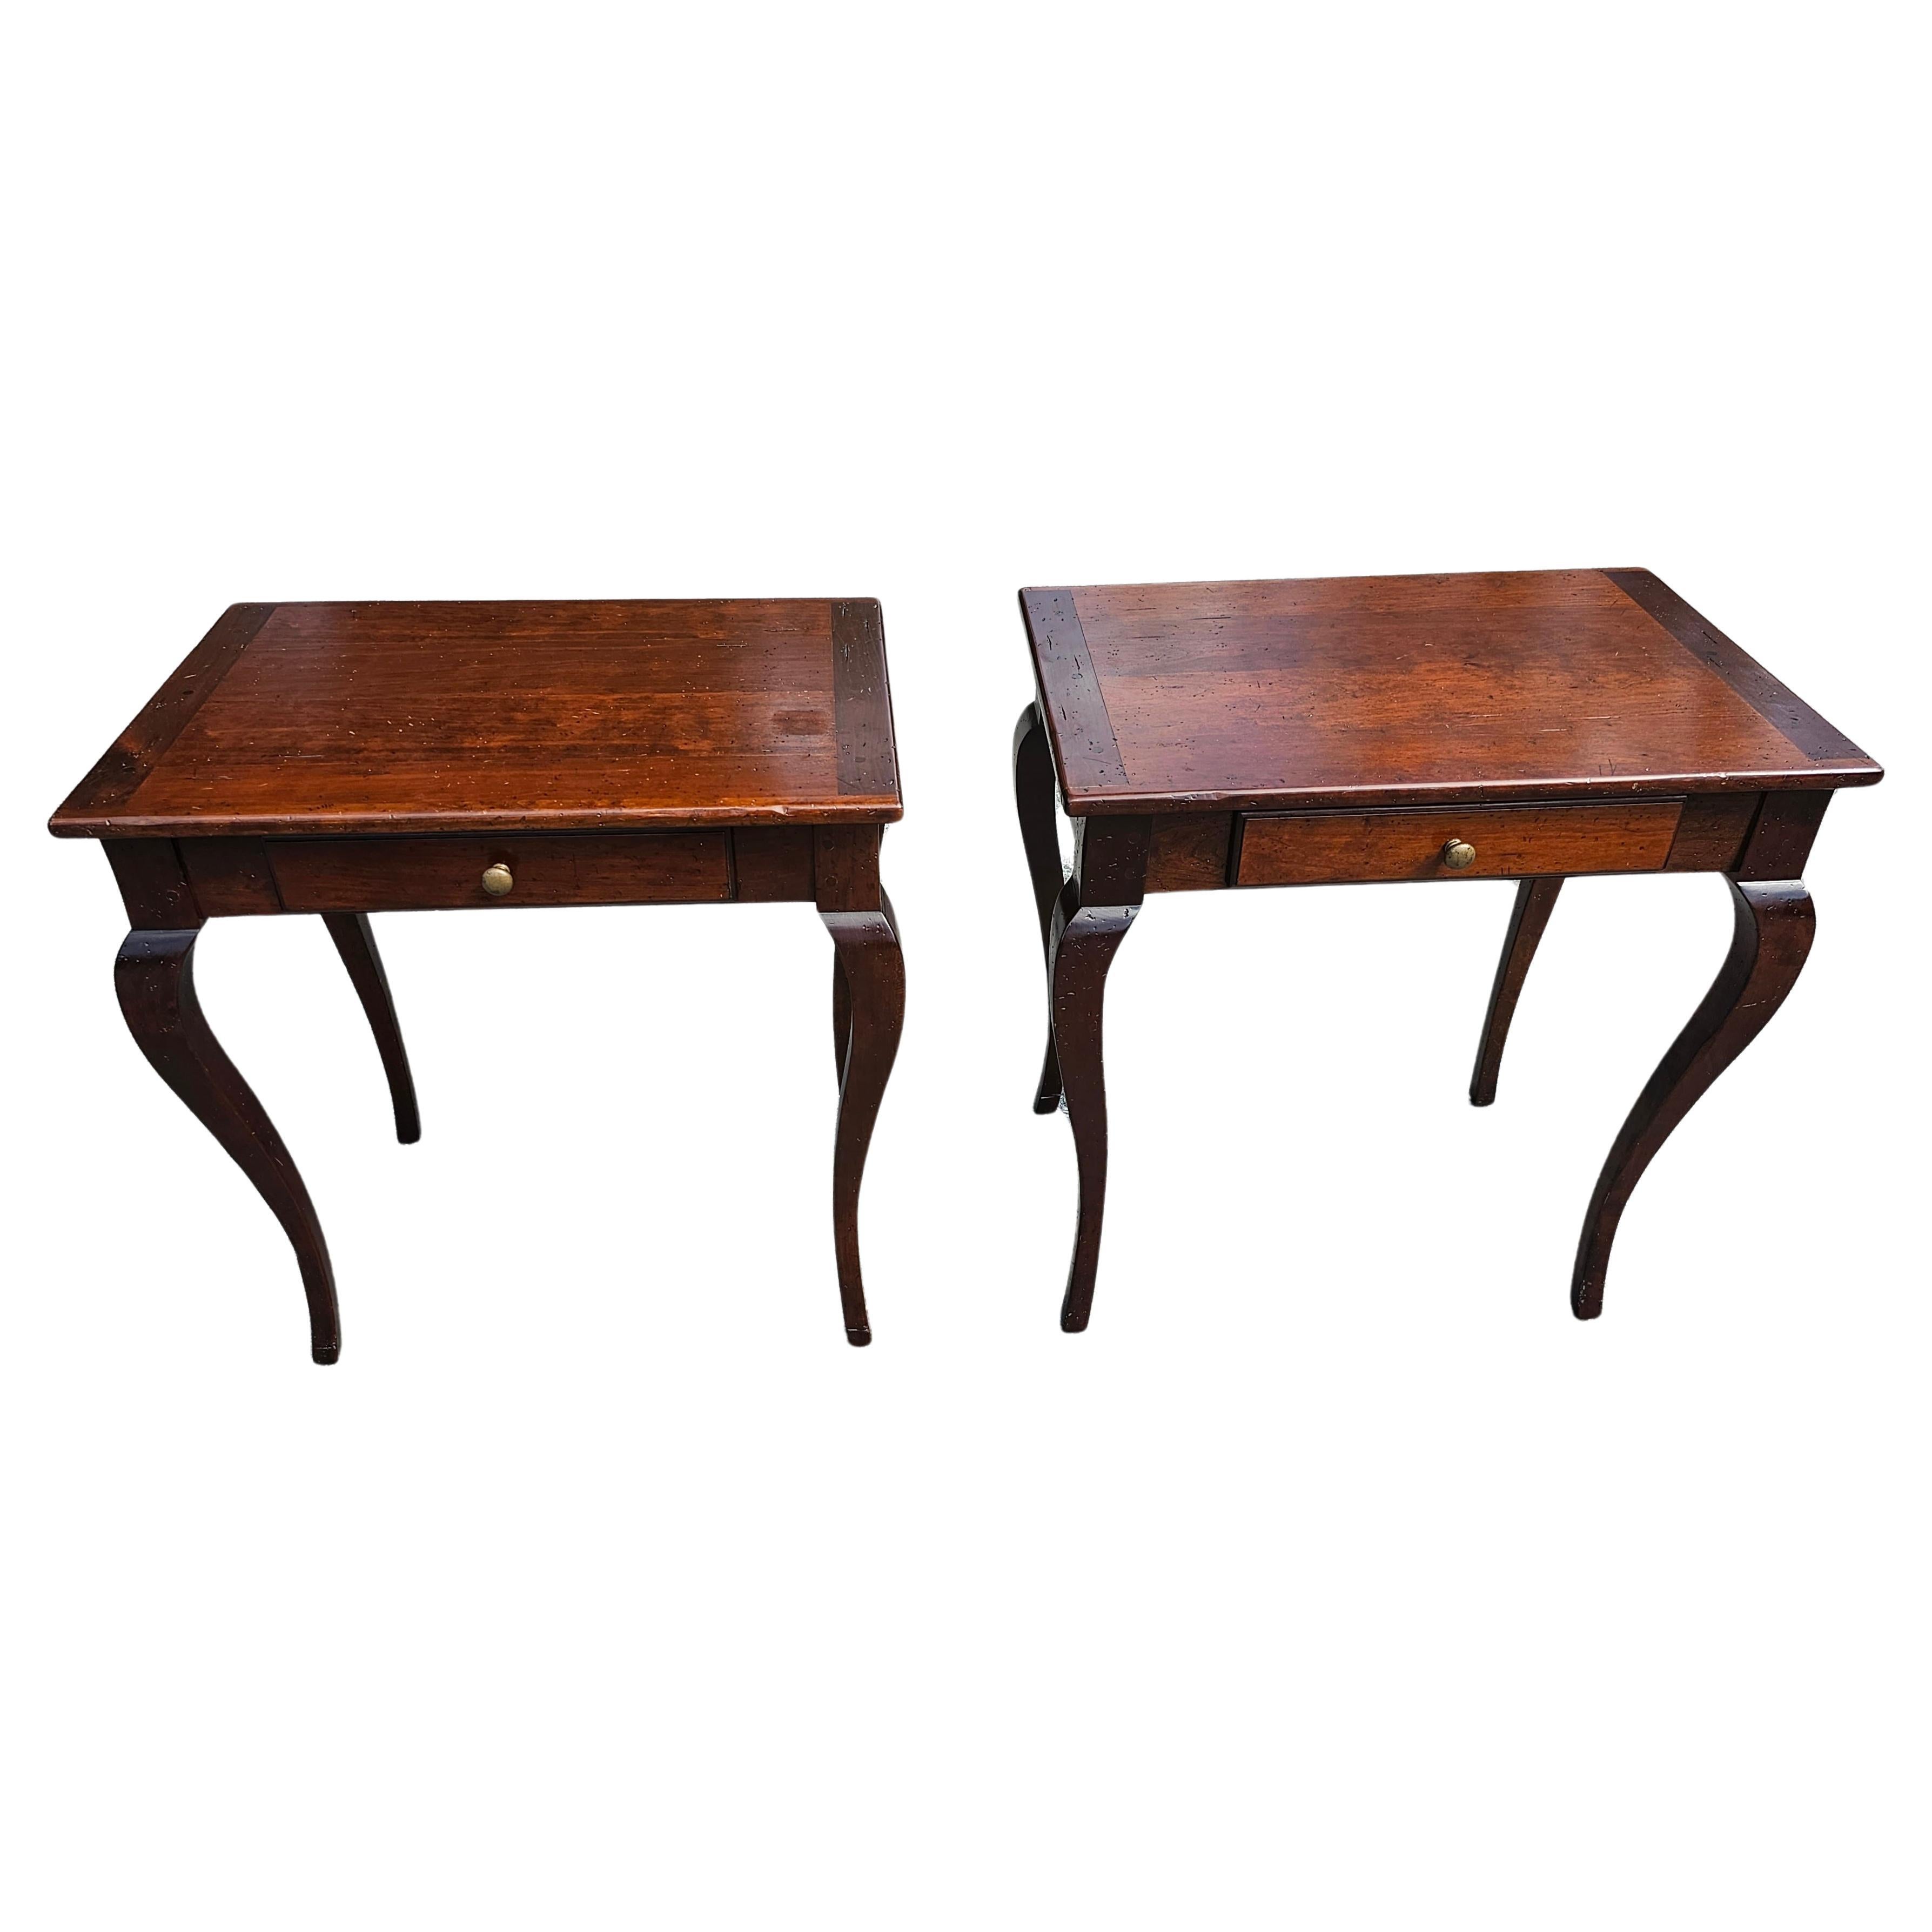 Pair of Kellogg Collection Distressed Walnut Single Drawer Side Tables